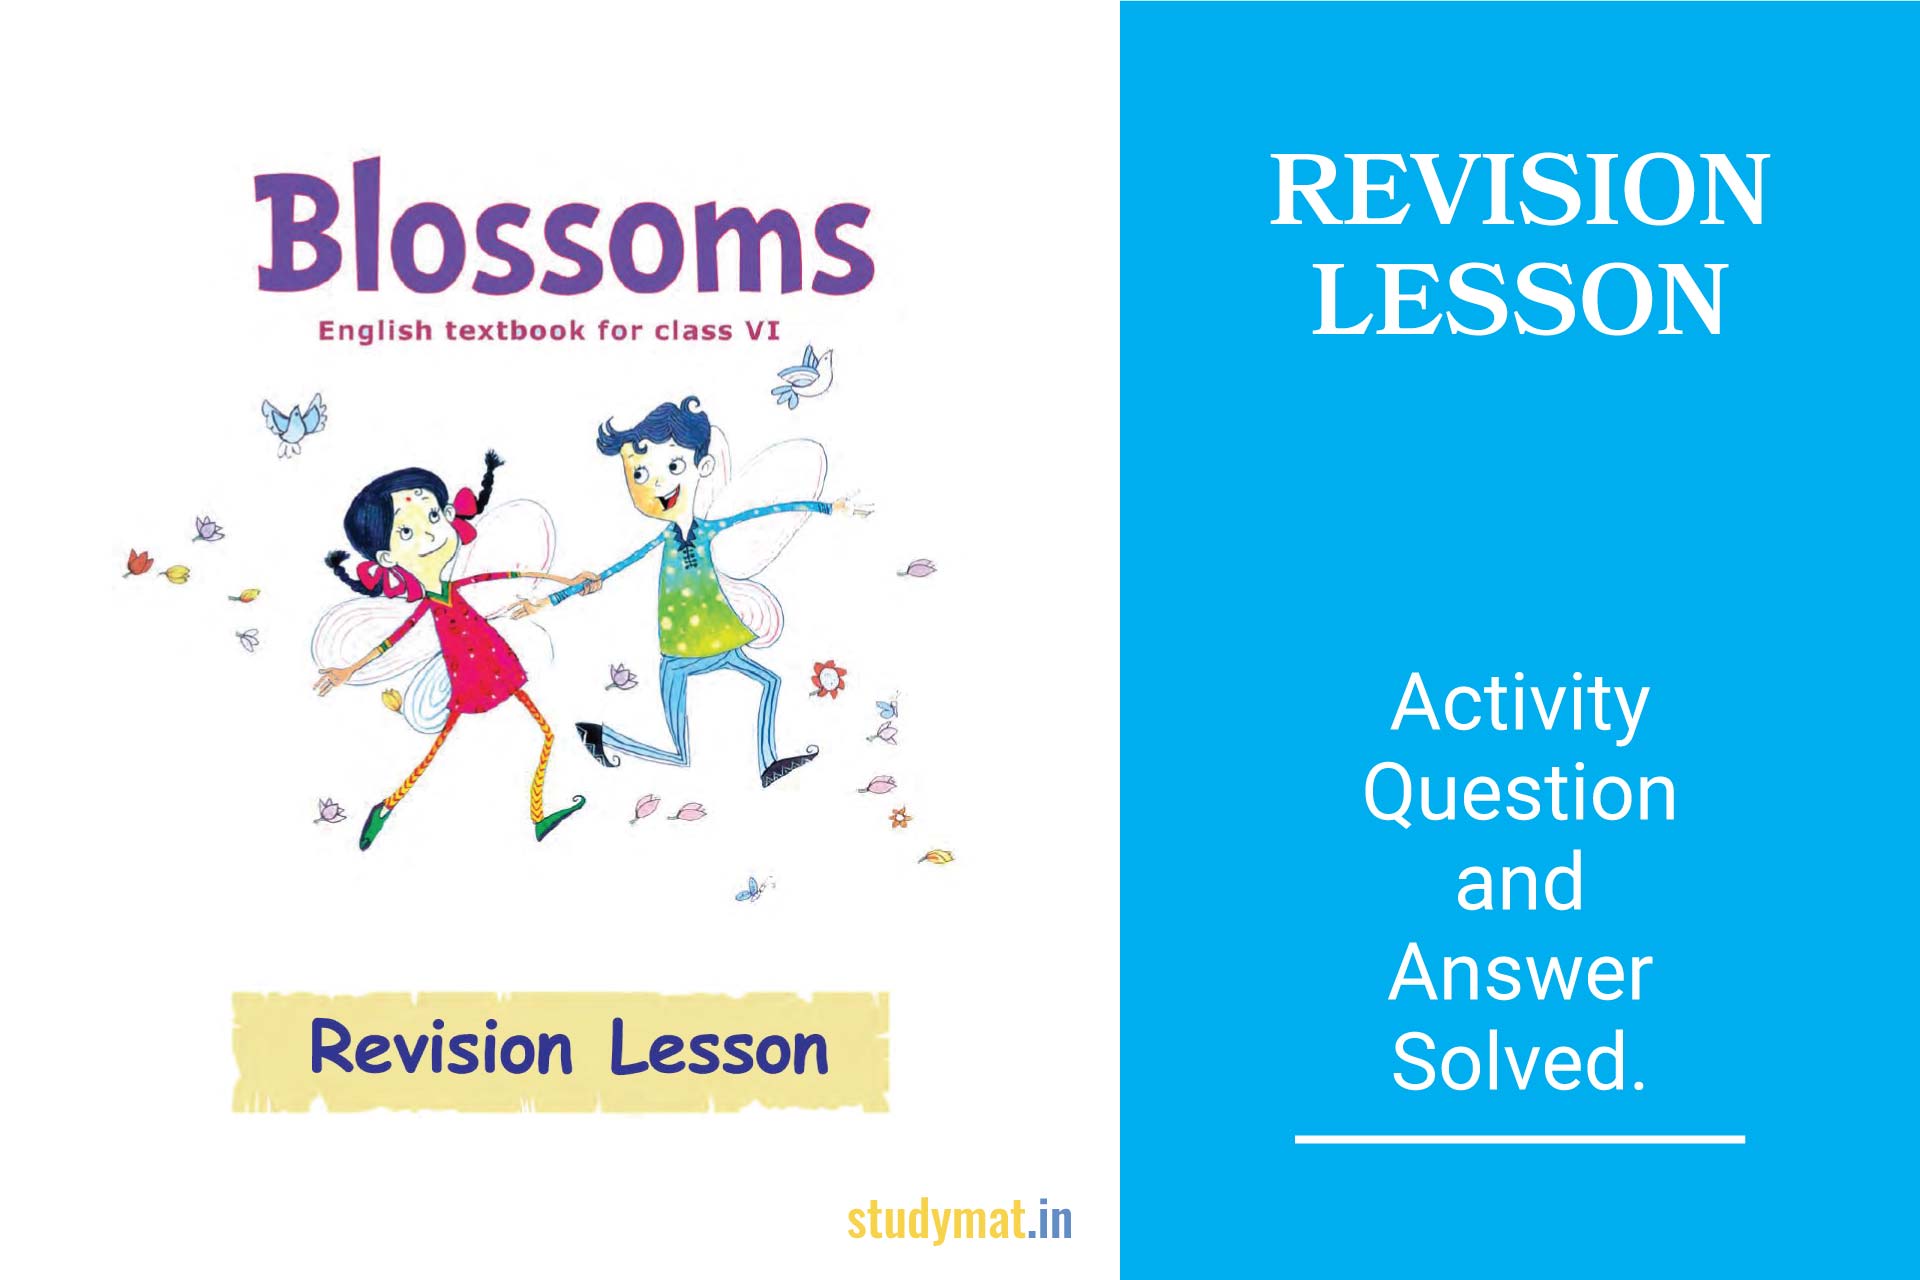 blossoms essay question and answer